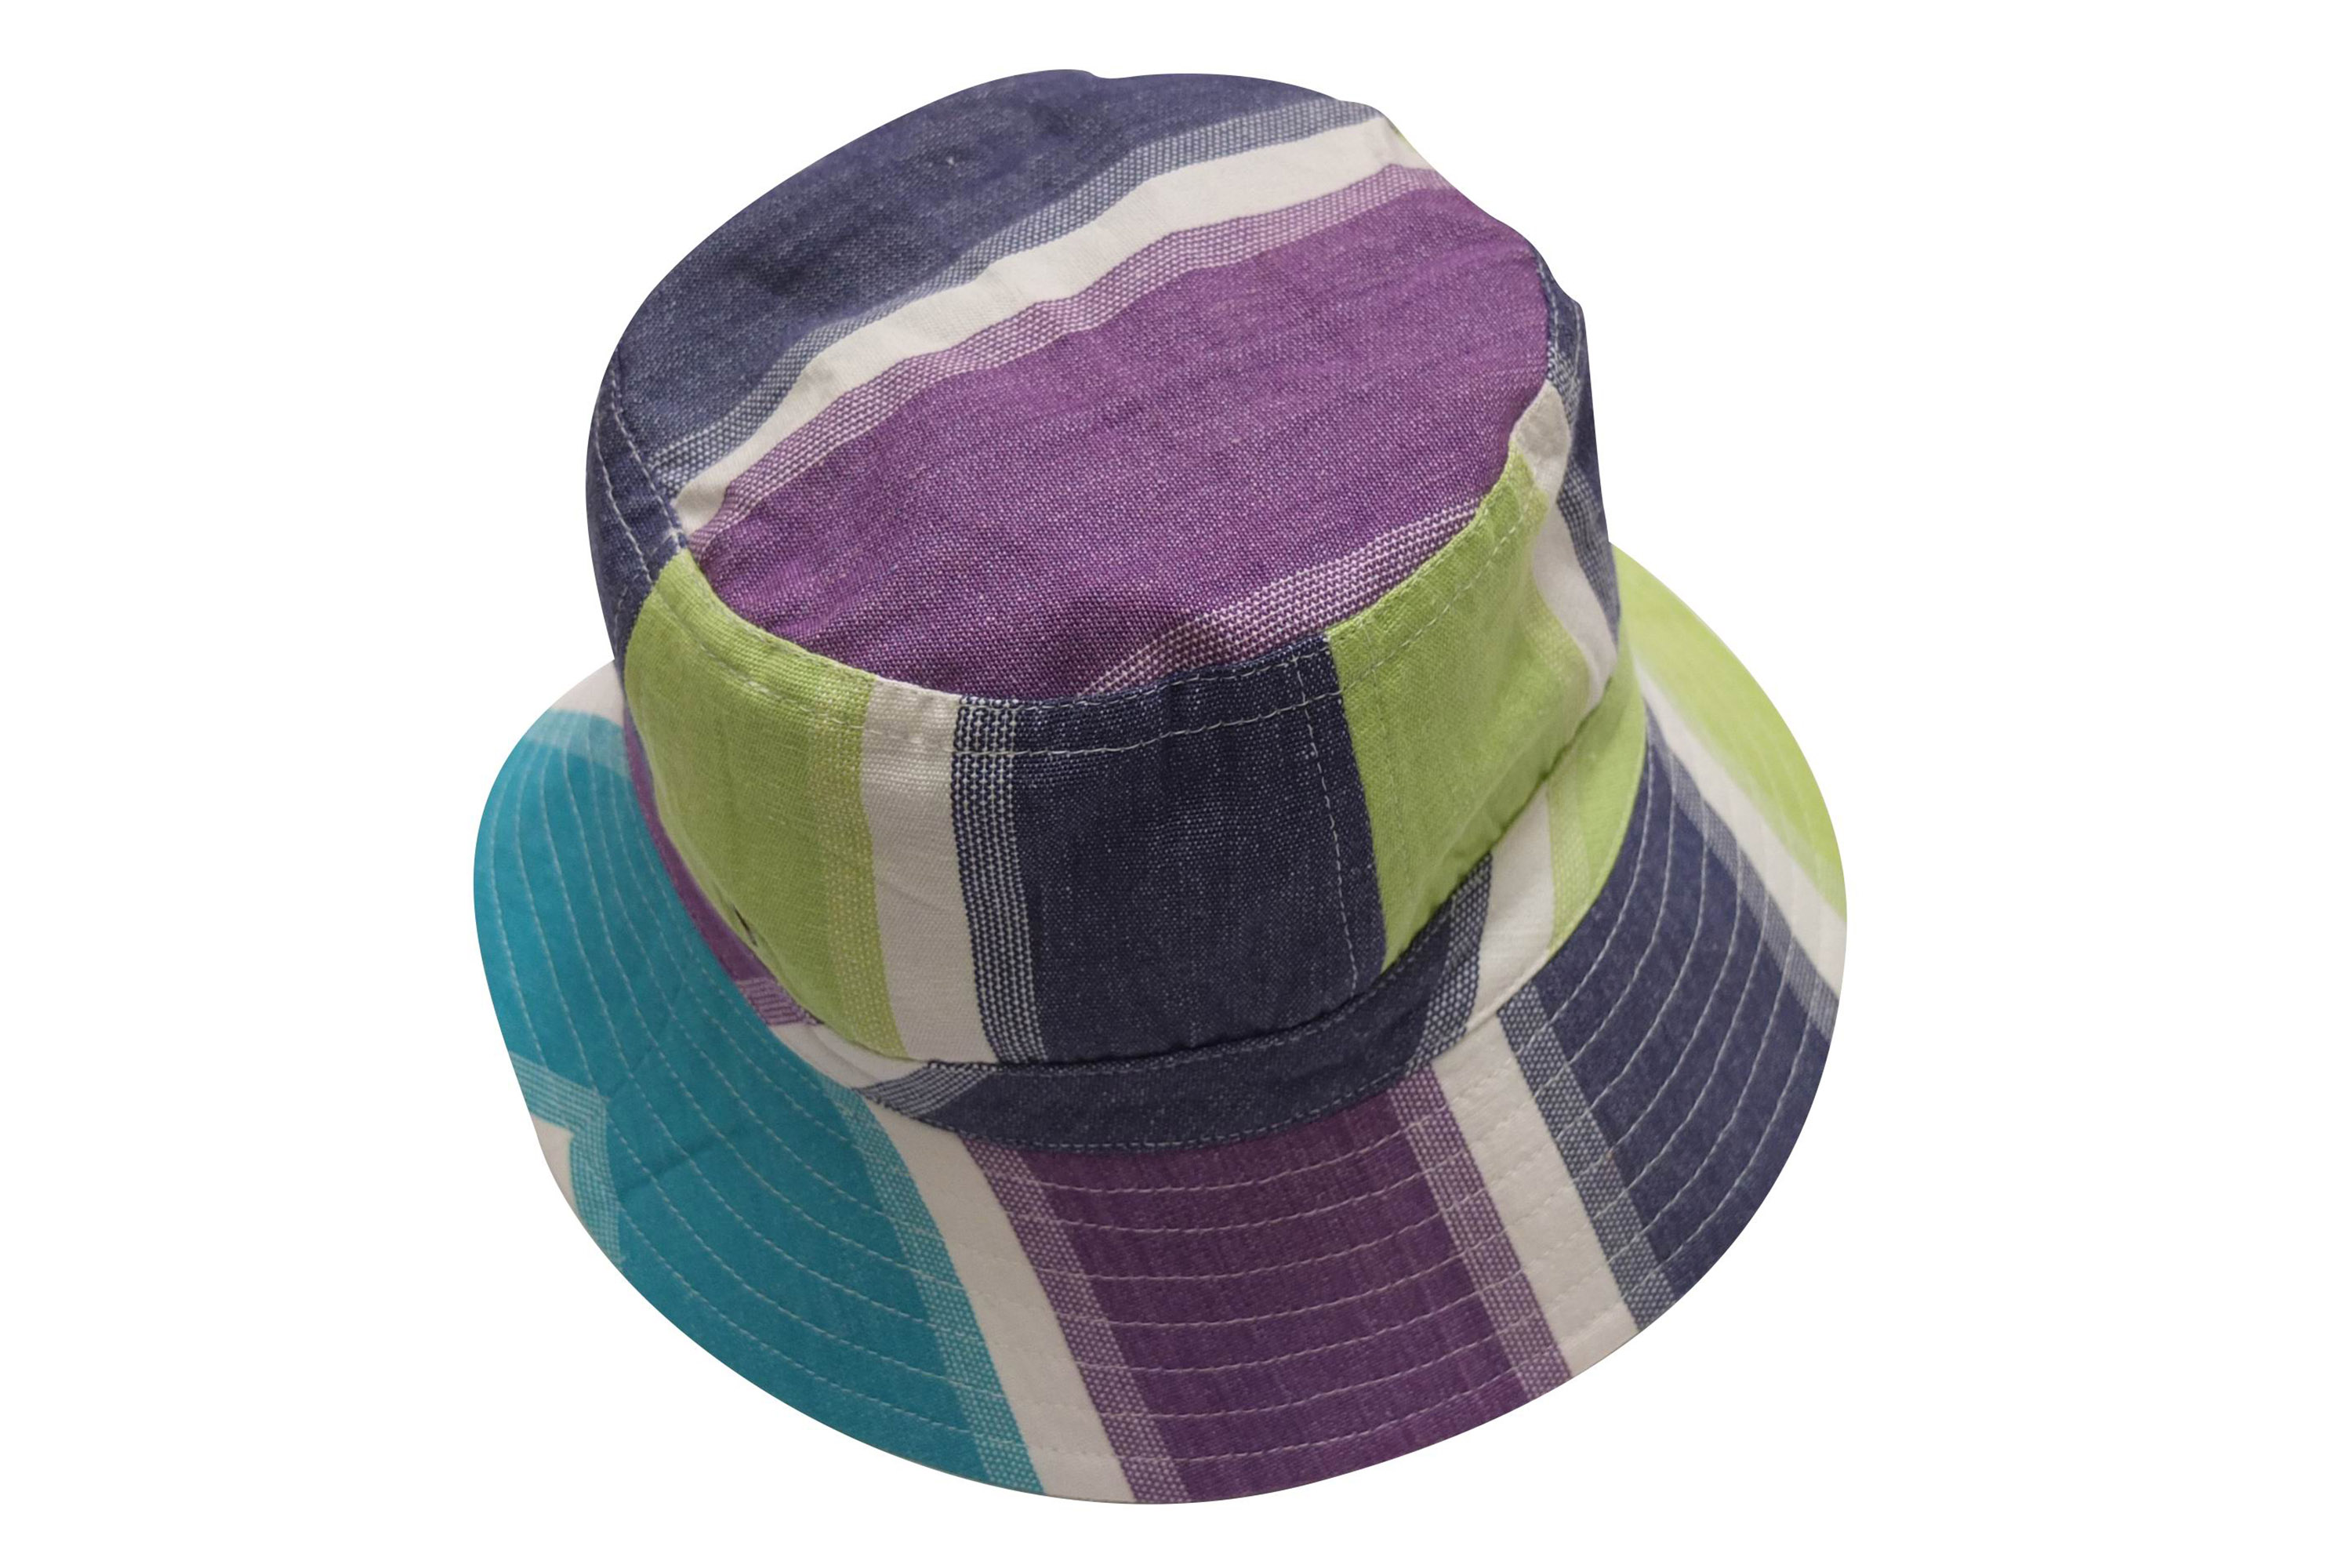 Fishing Striped Sun Hats | Bucket Hat Lime Green, Turquoise, White ...